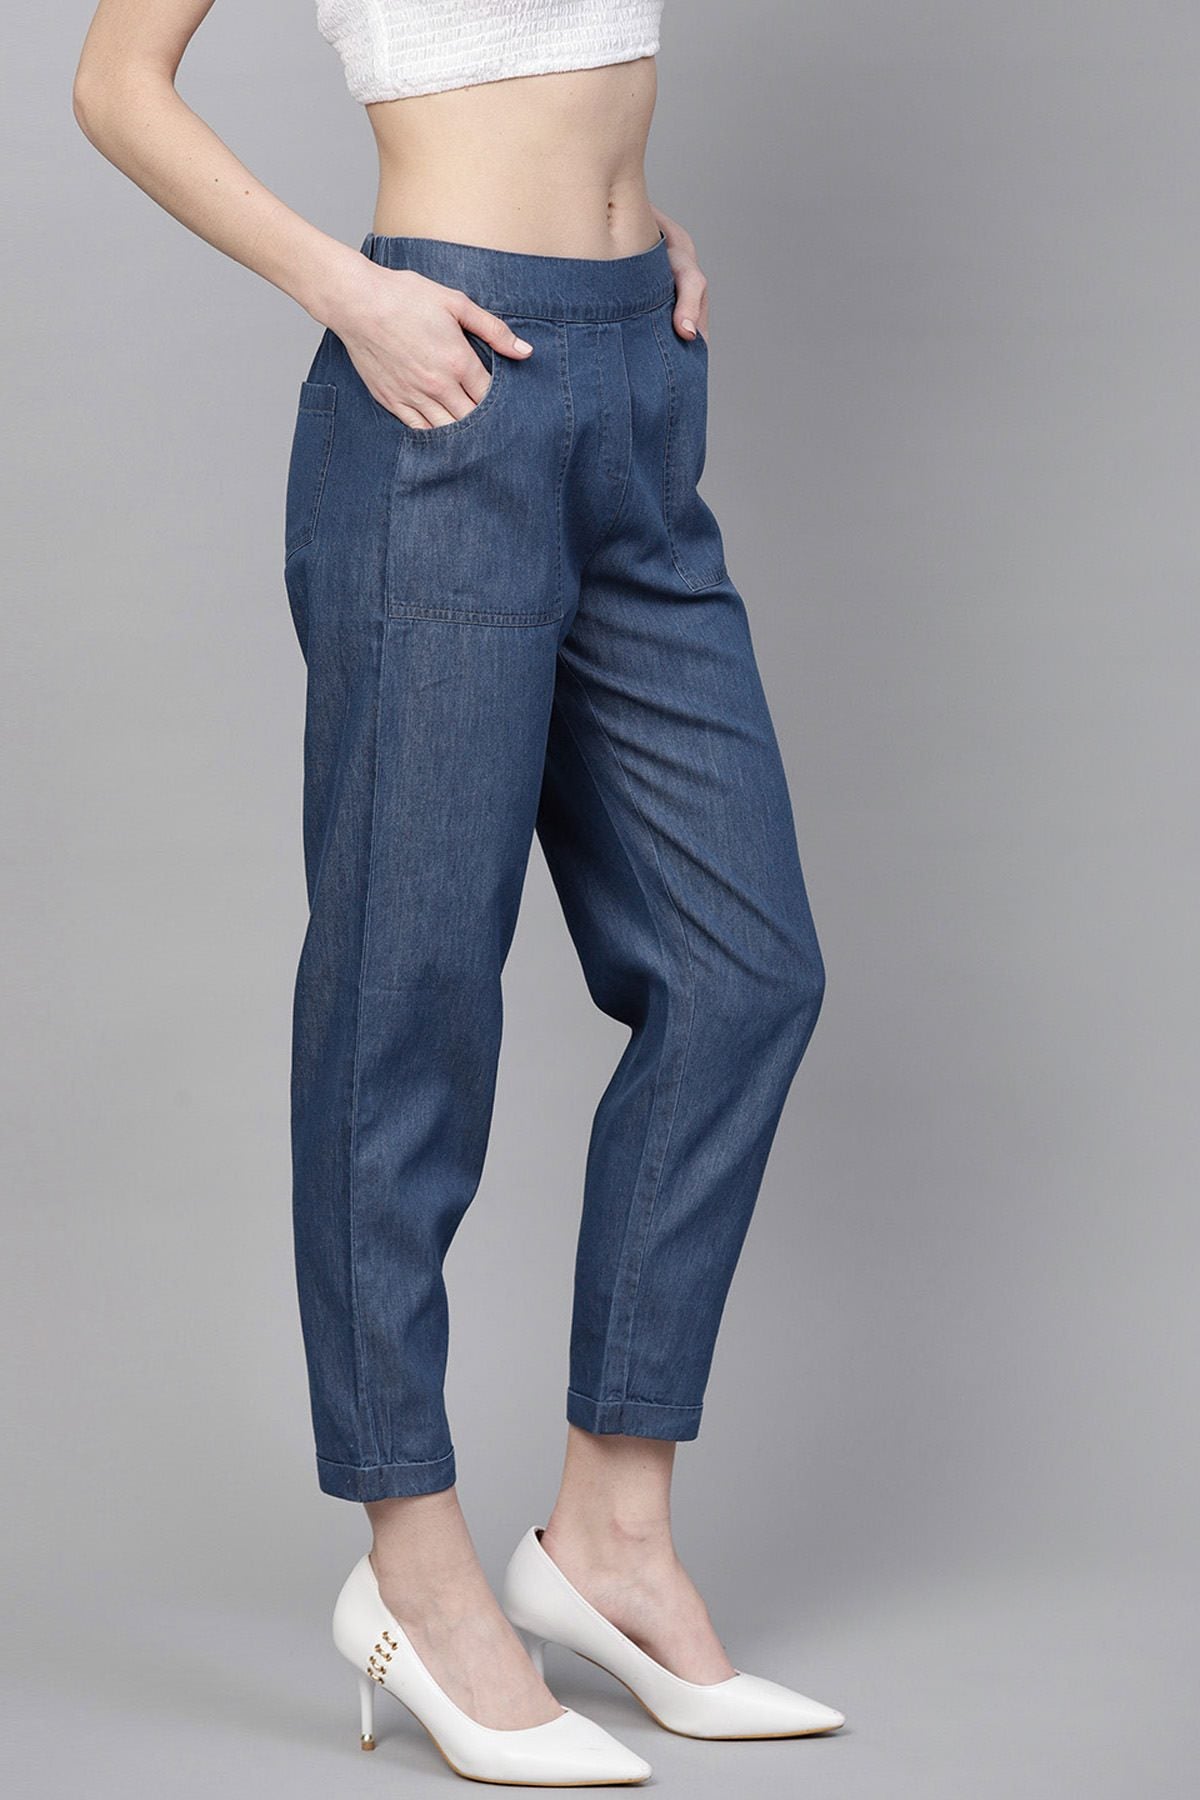 Women's Blue Denim Tapered Roll-Up Pants - Final Clearance Sale